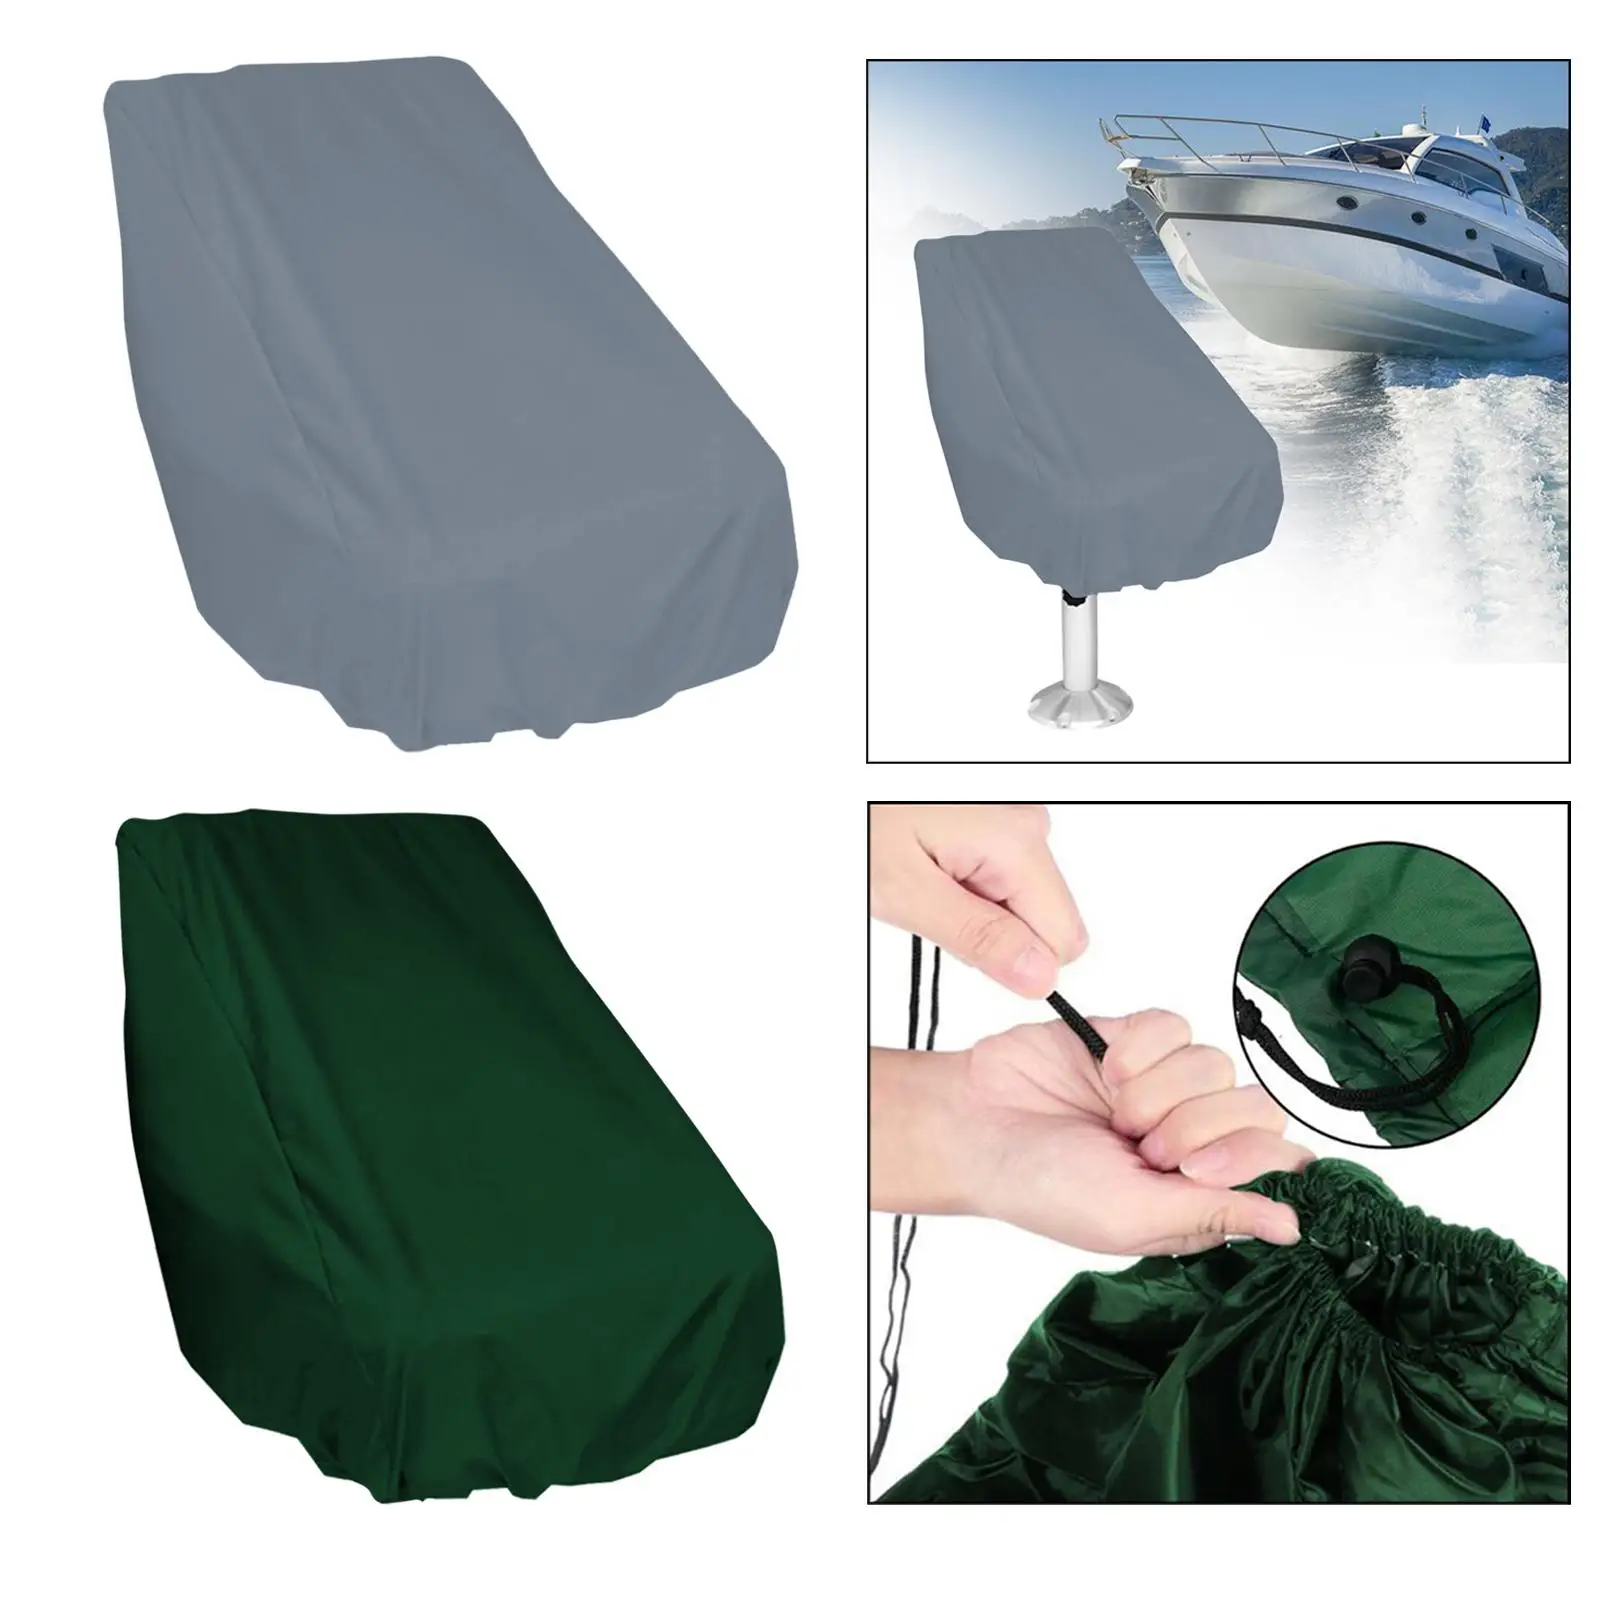 Boat Seat Cover Oxford Fabric Outdoor Heavy Duty Weather Resistant Helm Chair Protective Covers